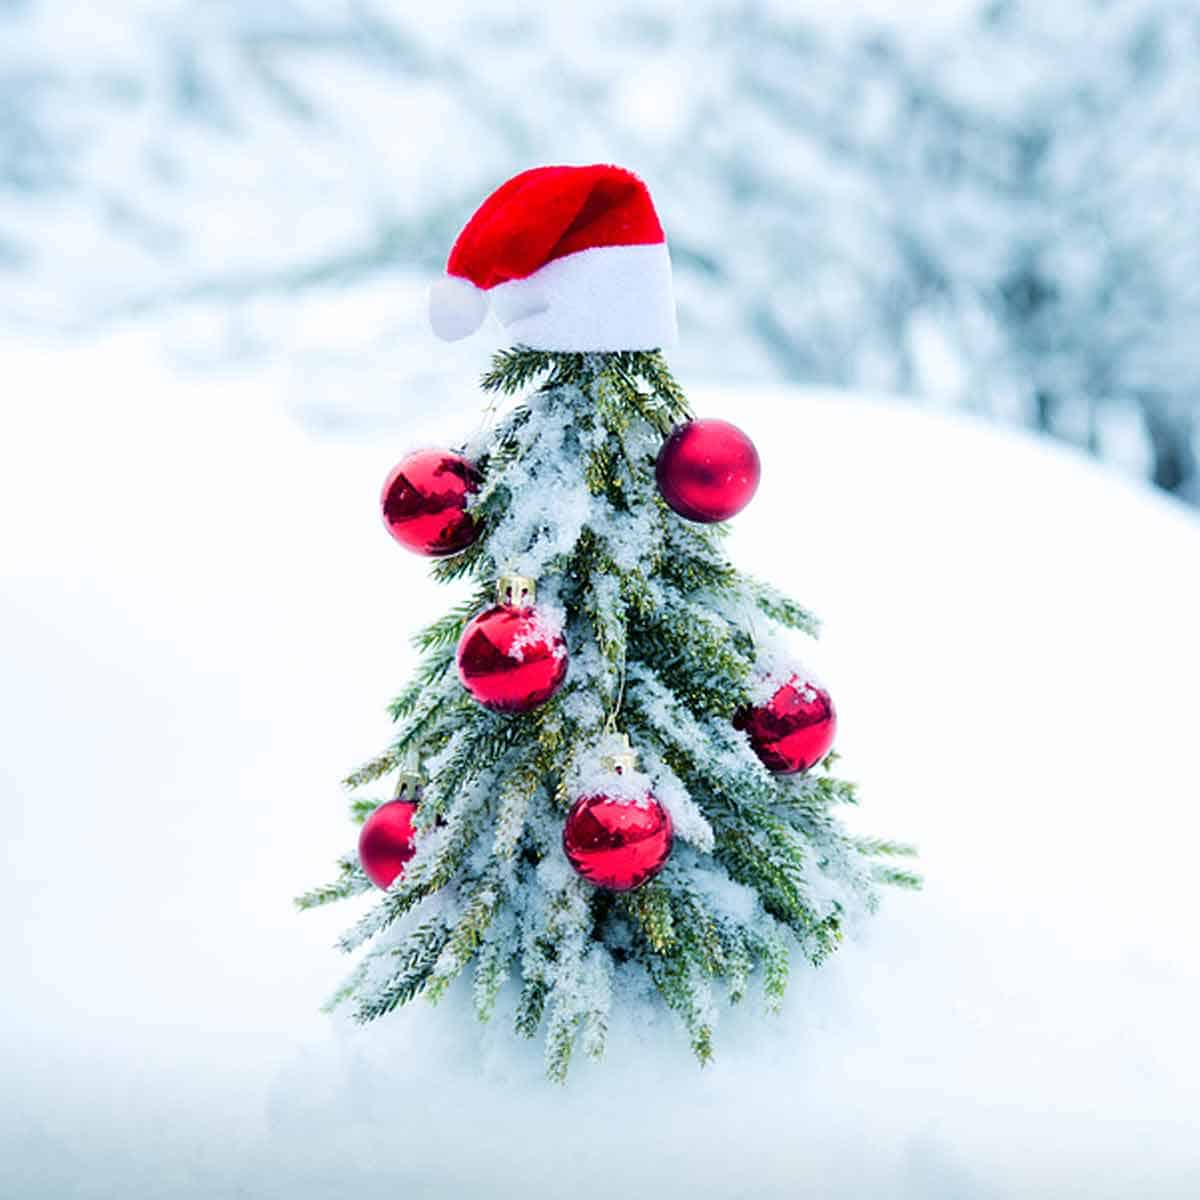 Small Christmas tree in the snow topped with a red Santa hat.